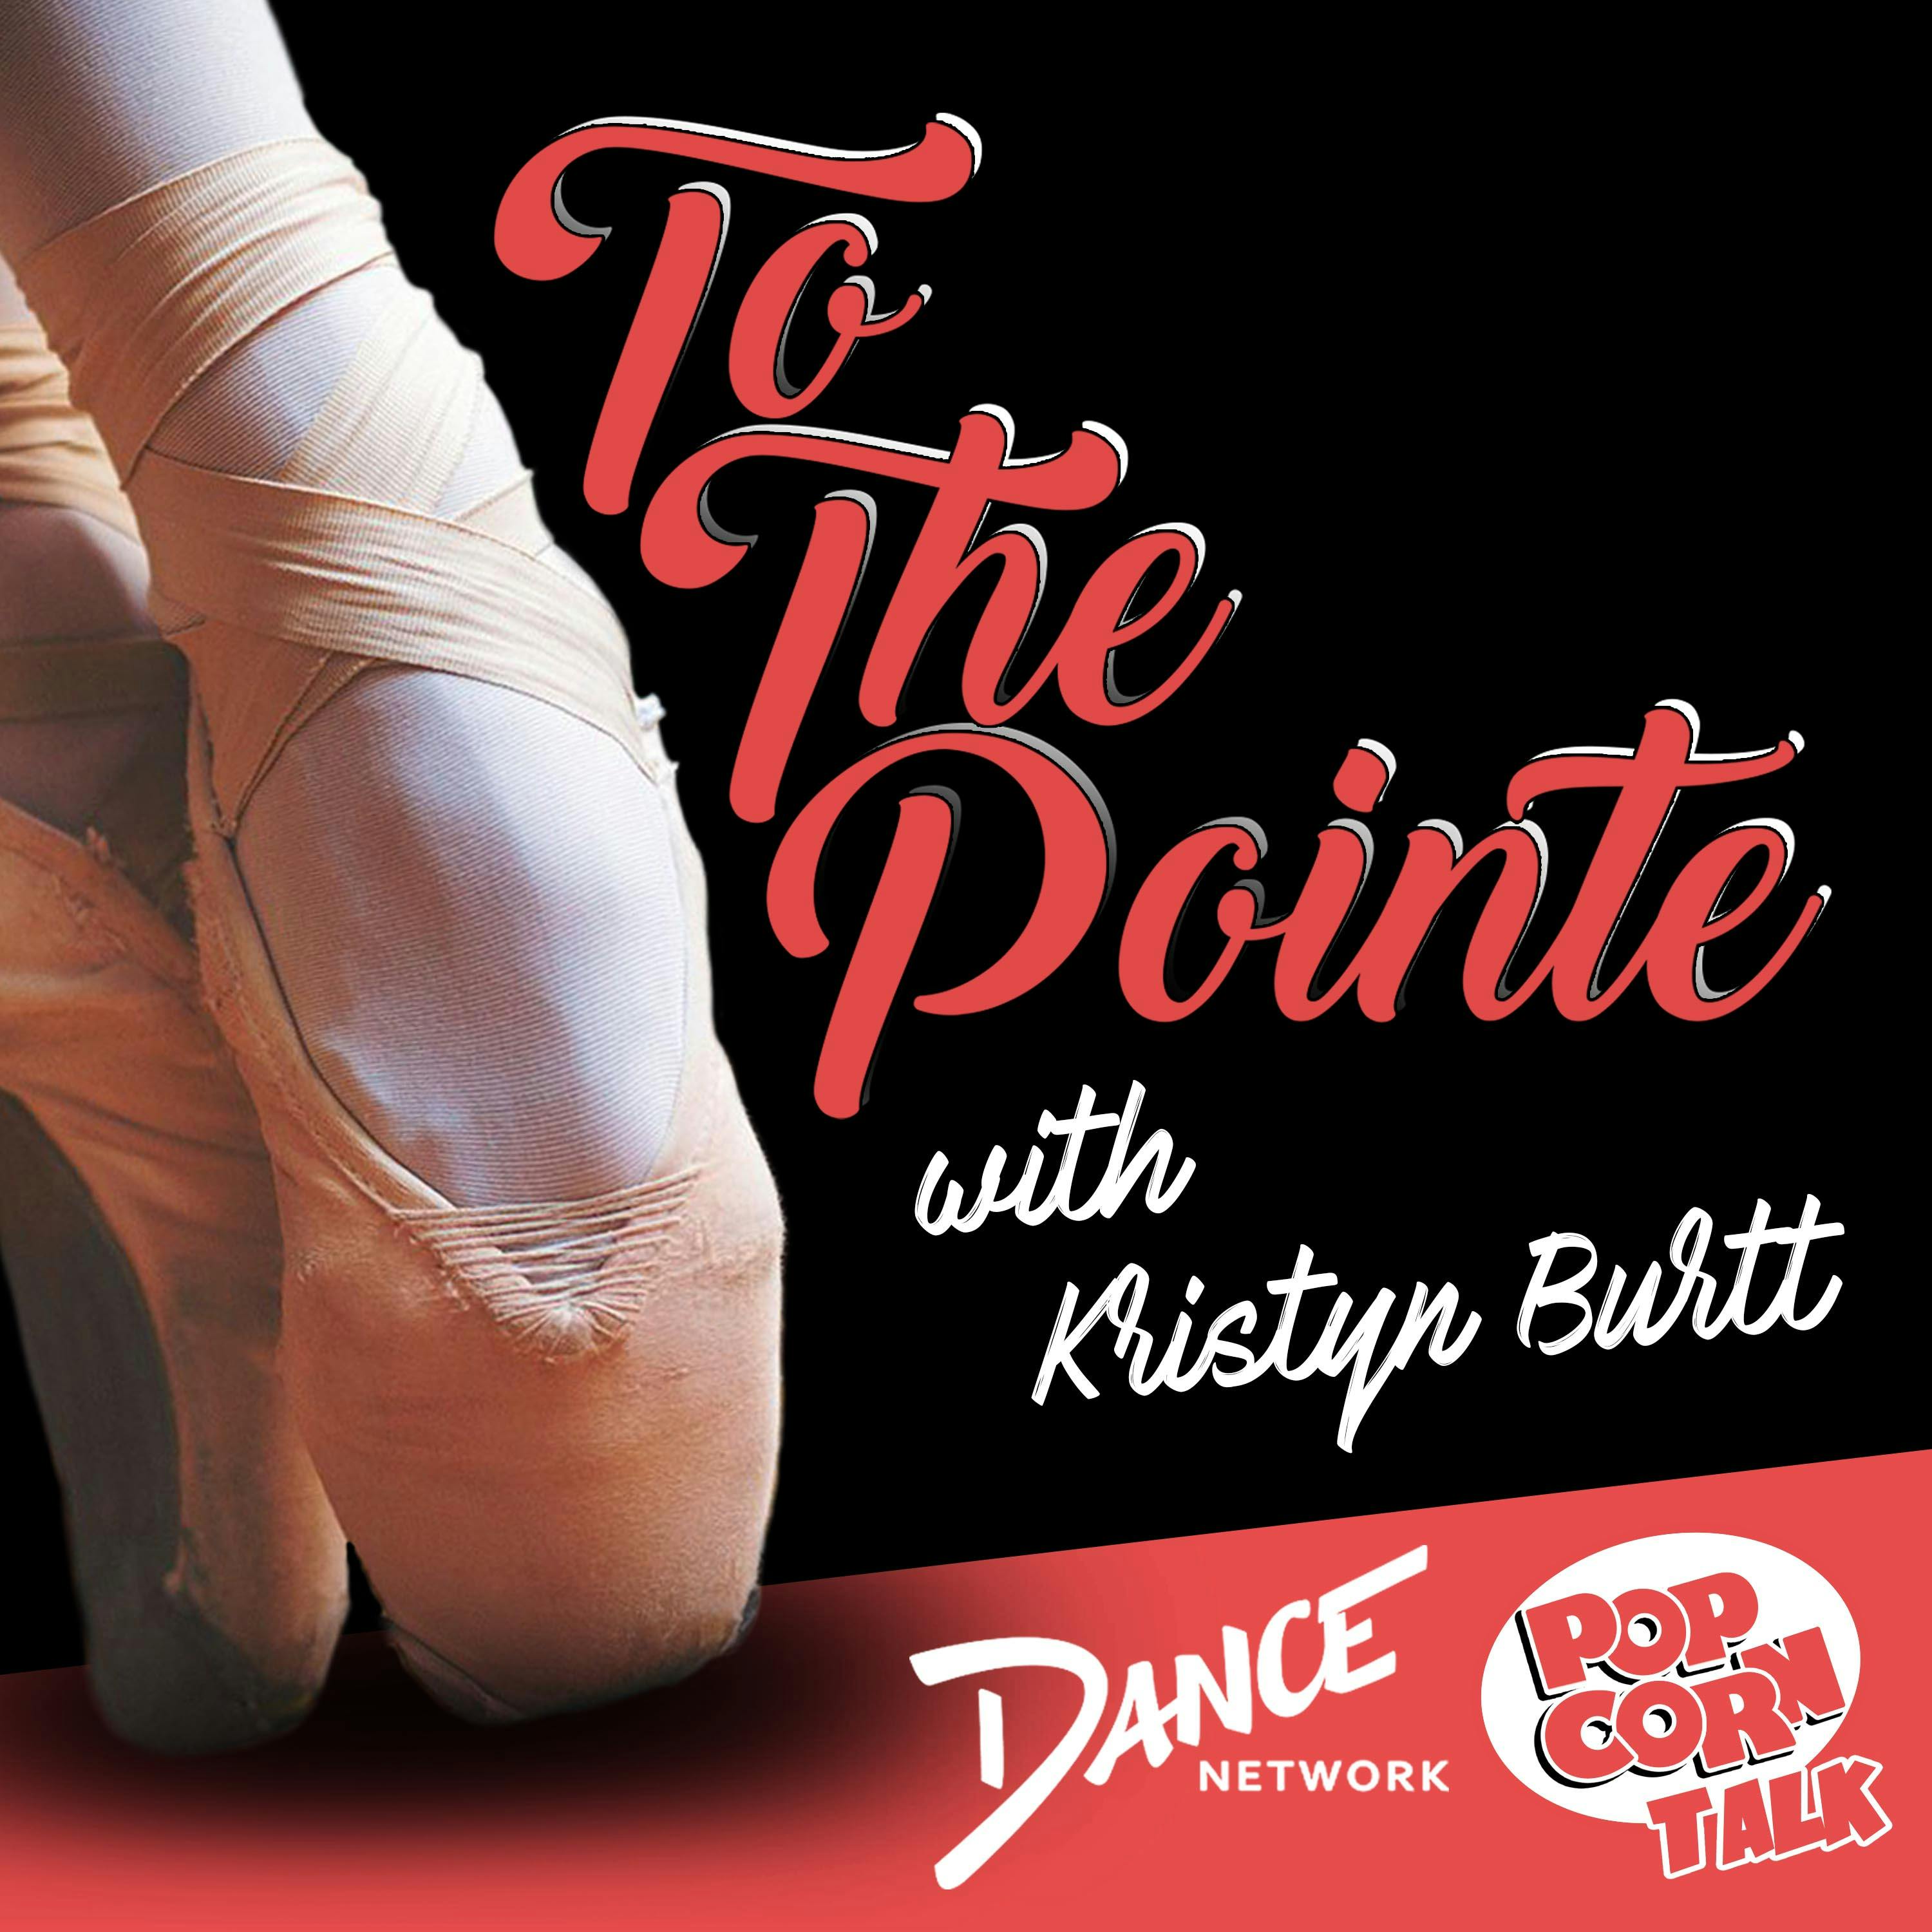 Will Thomas & Audrey Case – To The Pointe with Kristyn Burtt